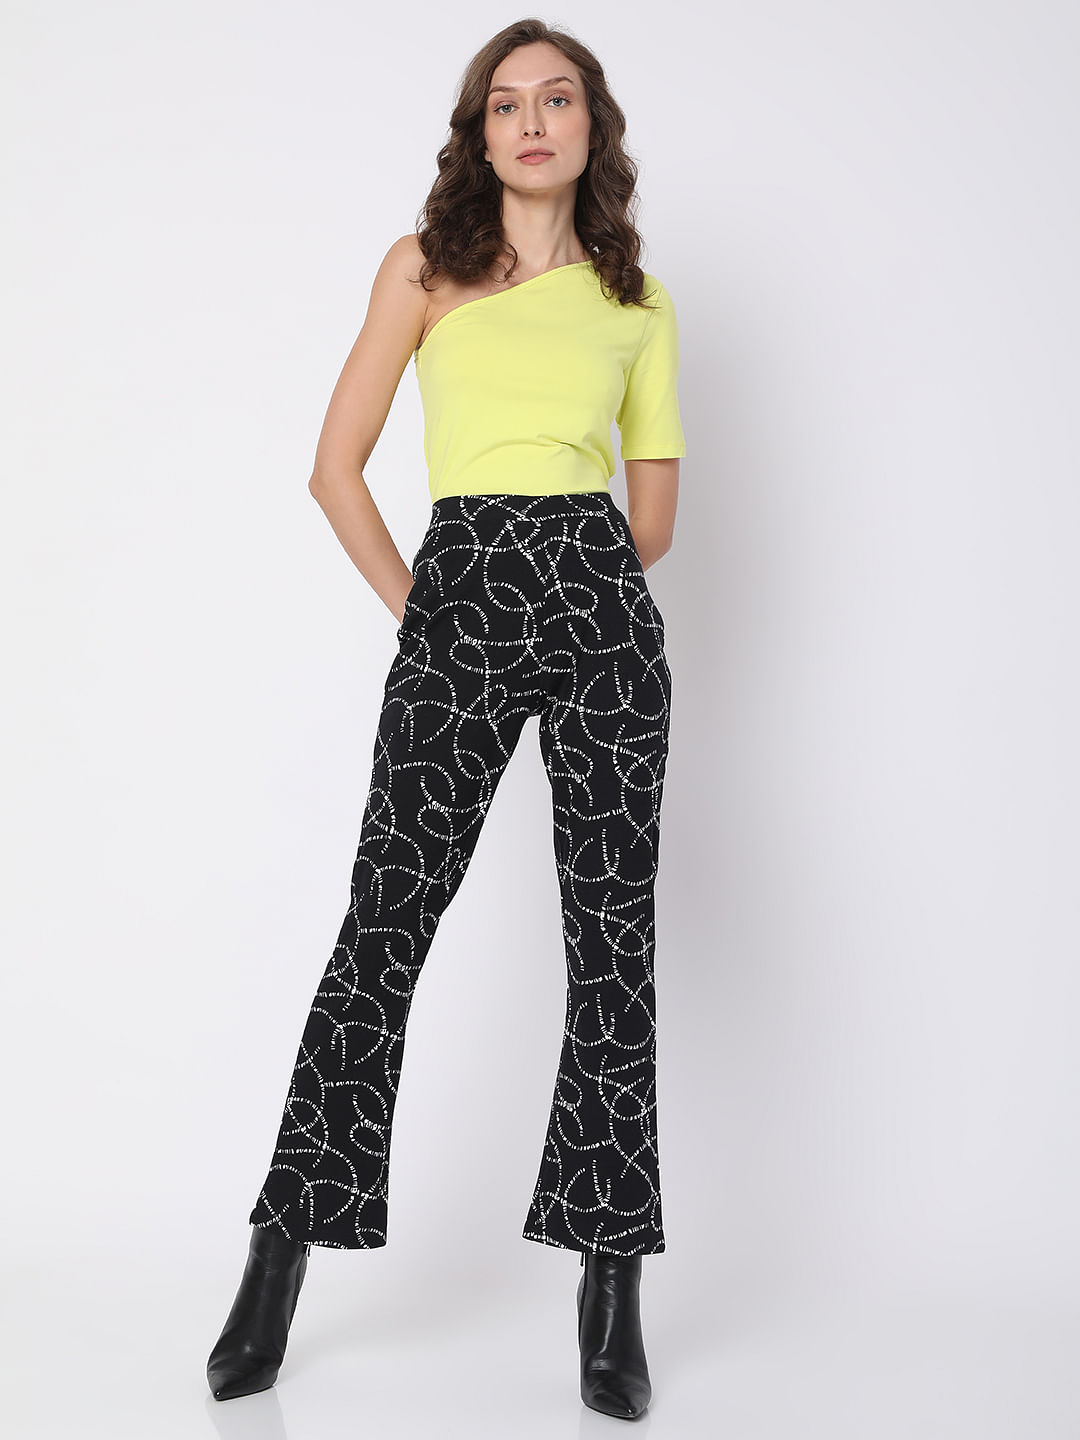 PRINTED TOP TROUSERS CO-ORD SET